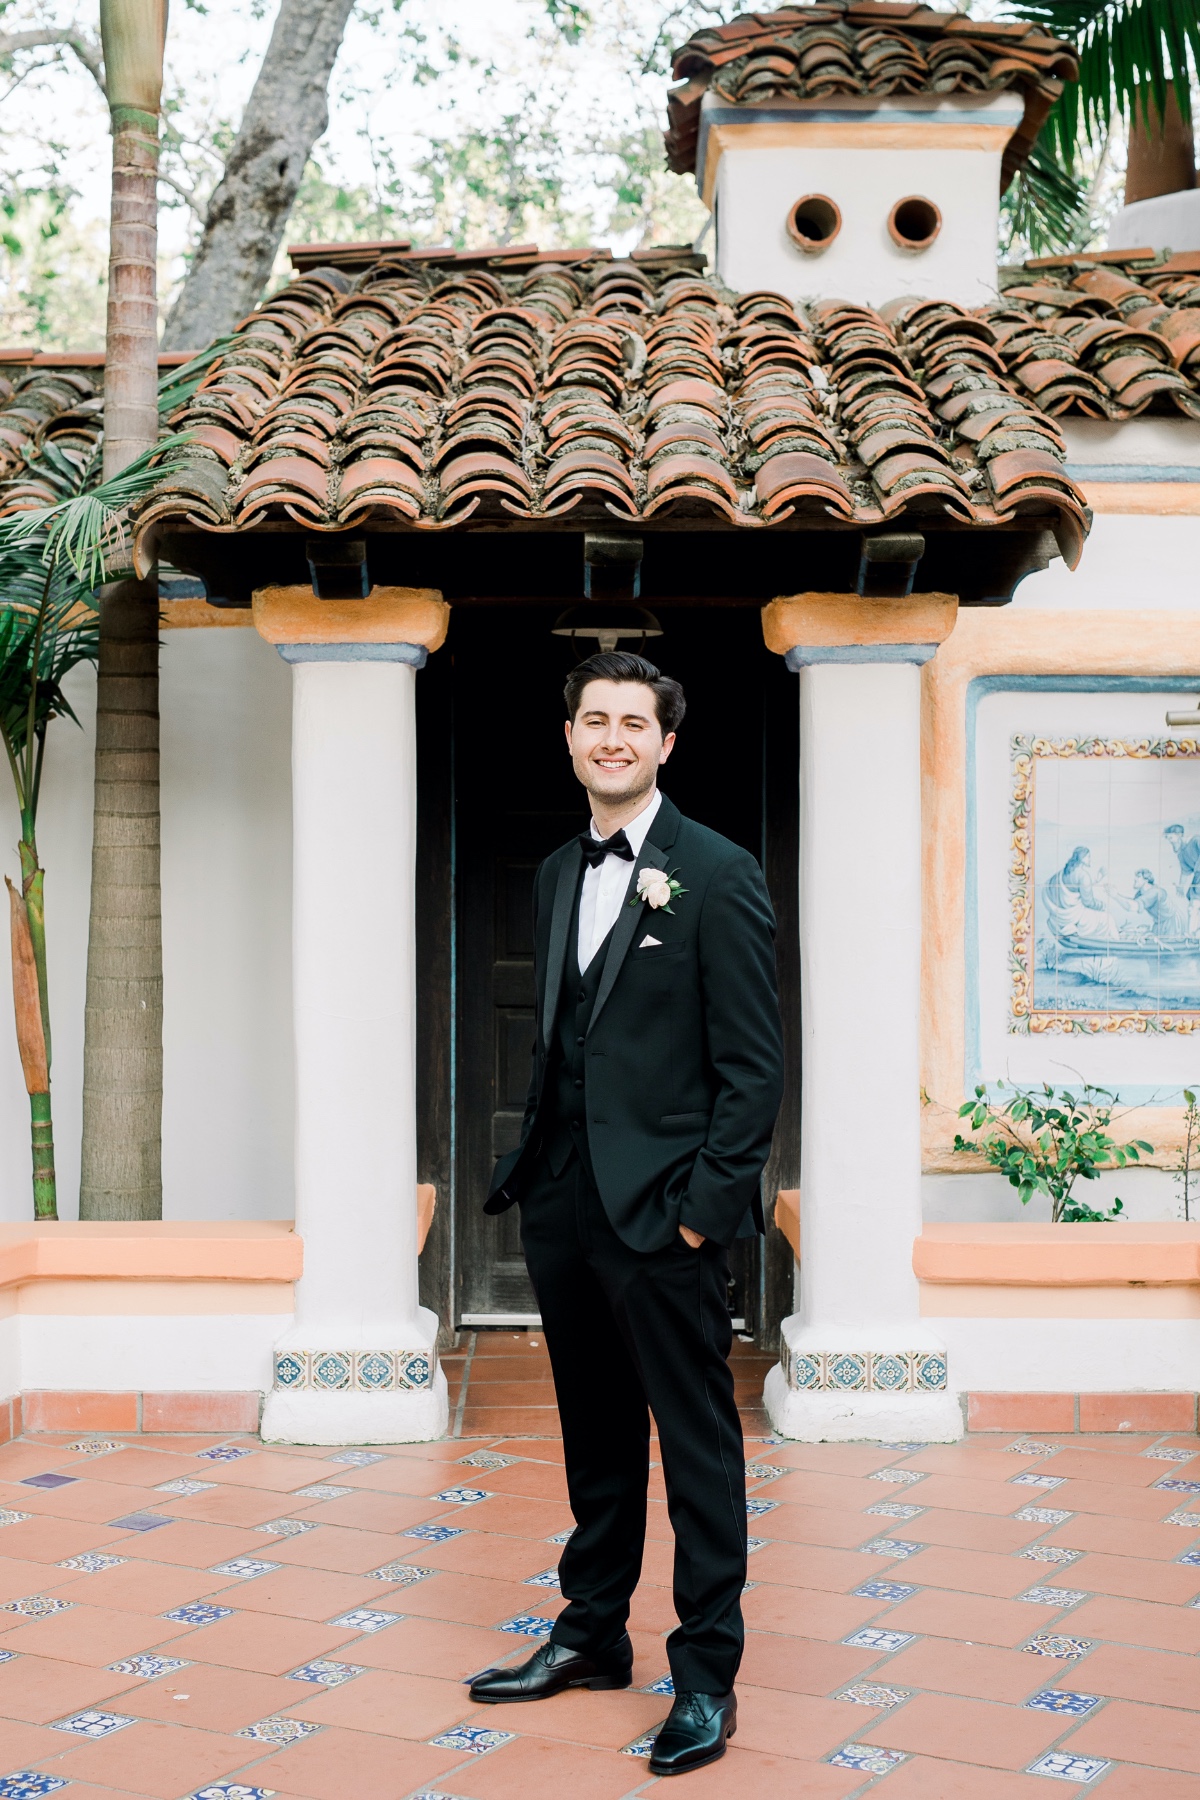 Groom in Tuxedo with white boutonniere